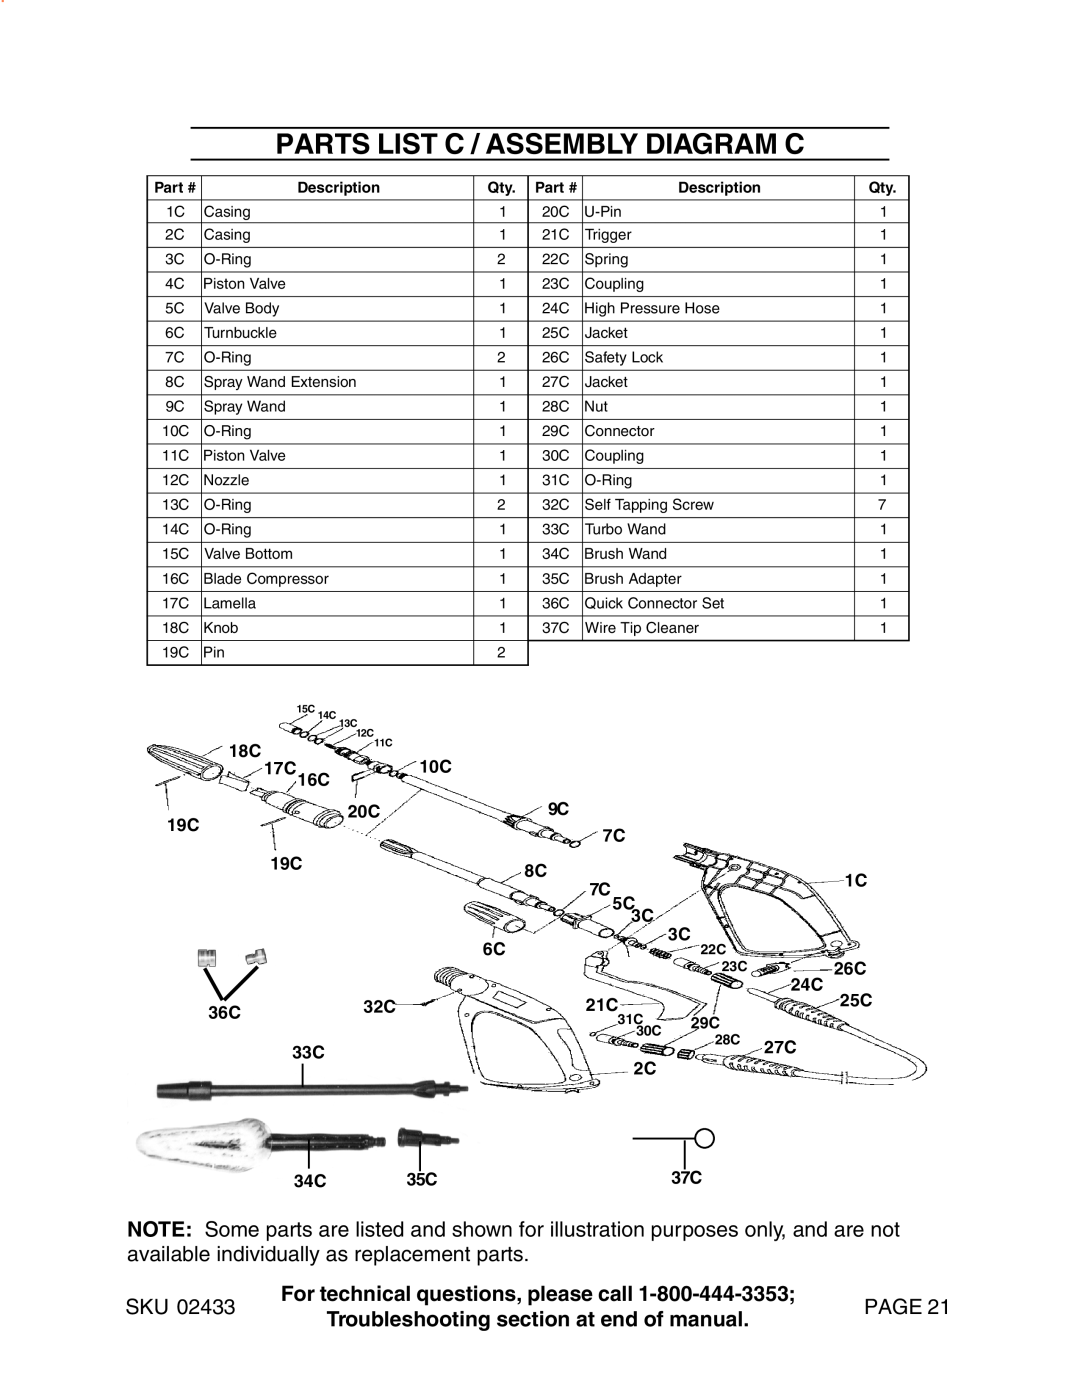 Harbor Freight Tools 2433 manual Parts List C / Assembly Diagram C, For technical questions, please call, Page 